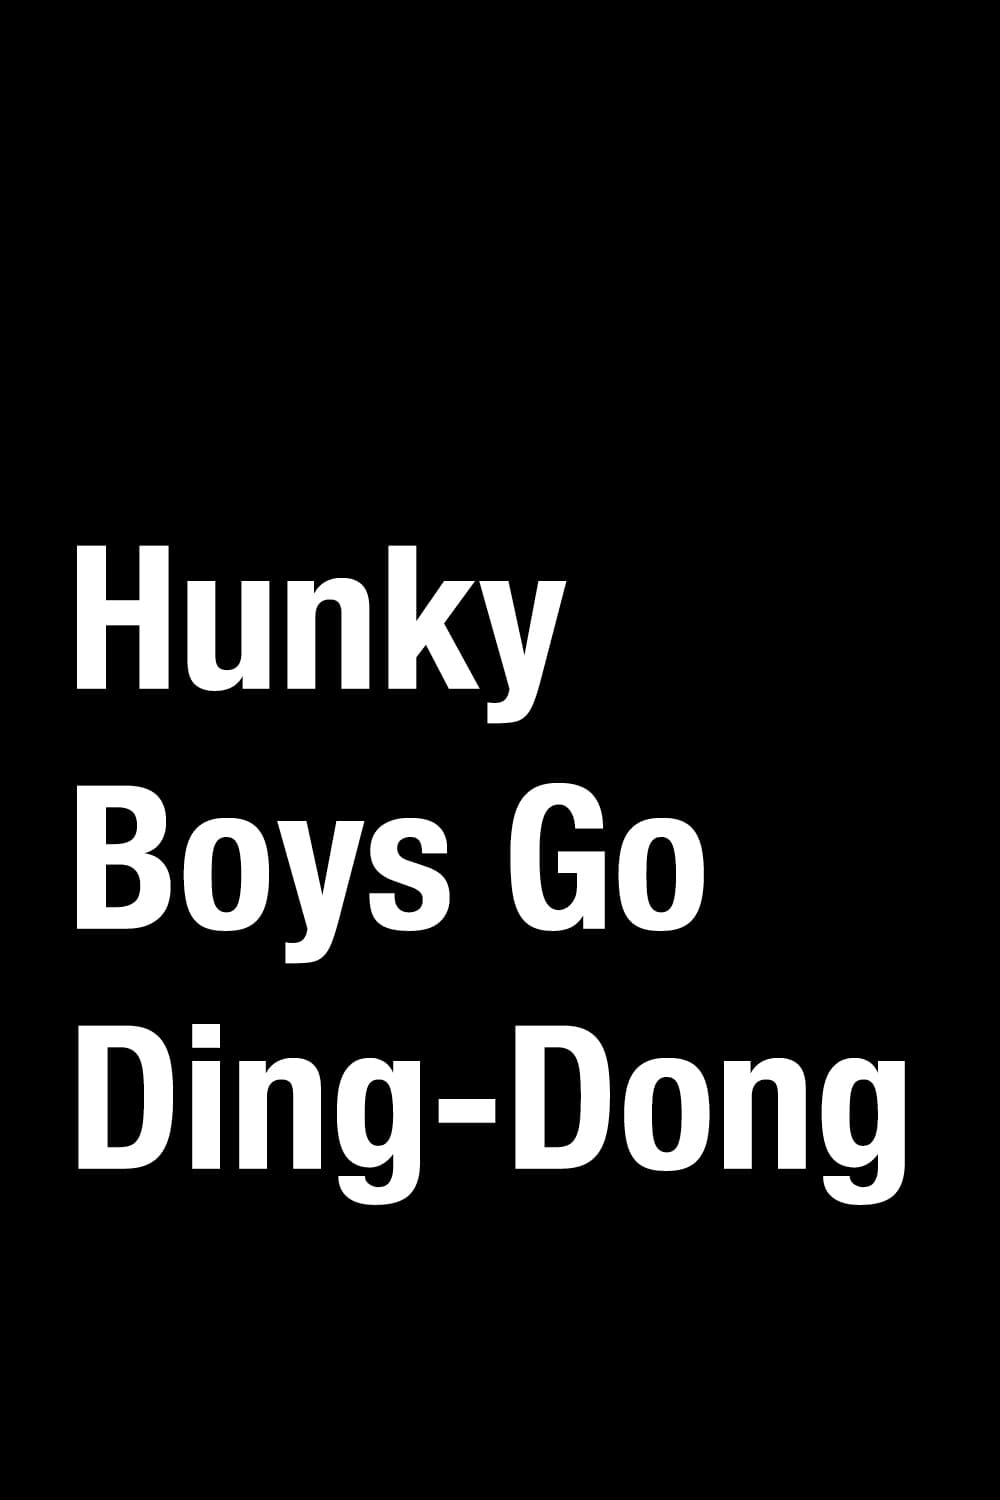 Hunky Boys Go Ding-Dong